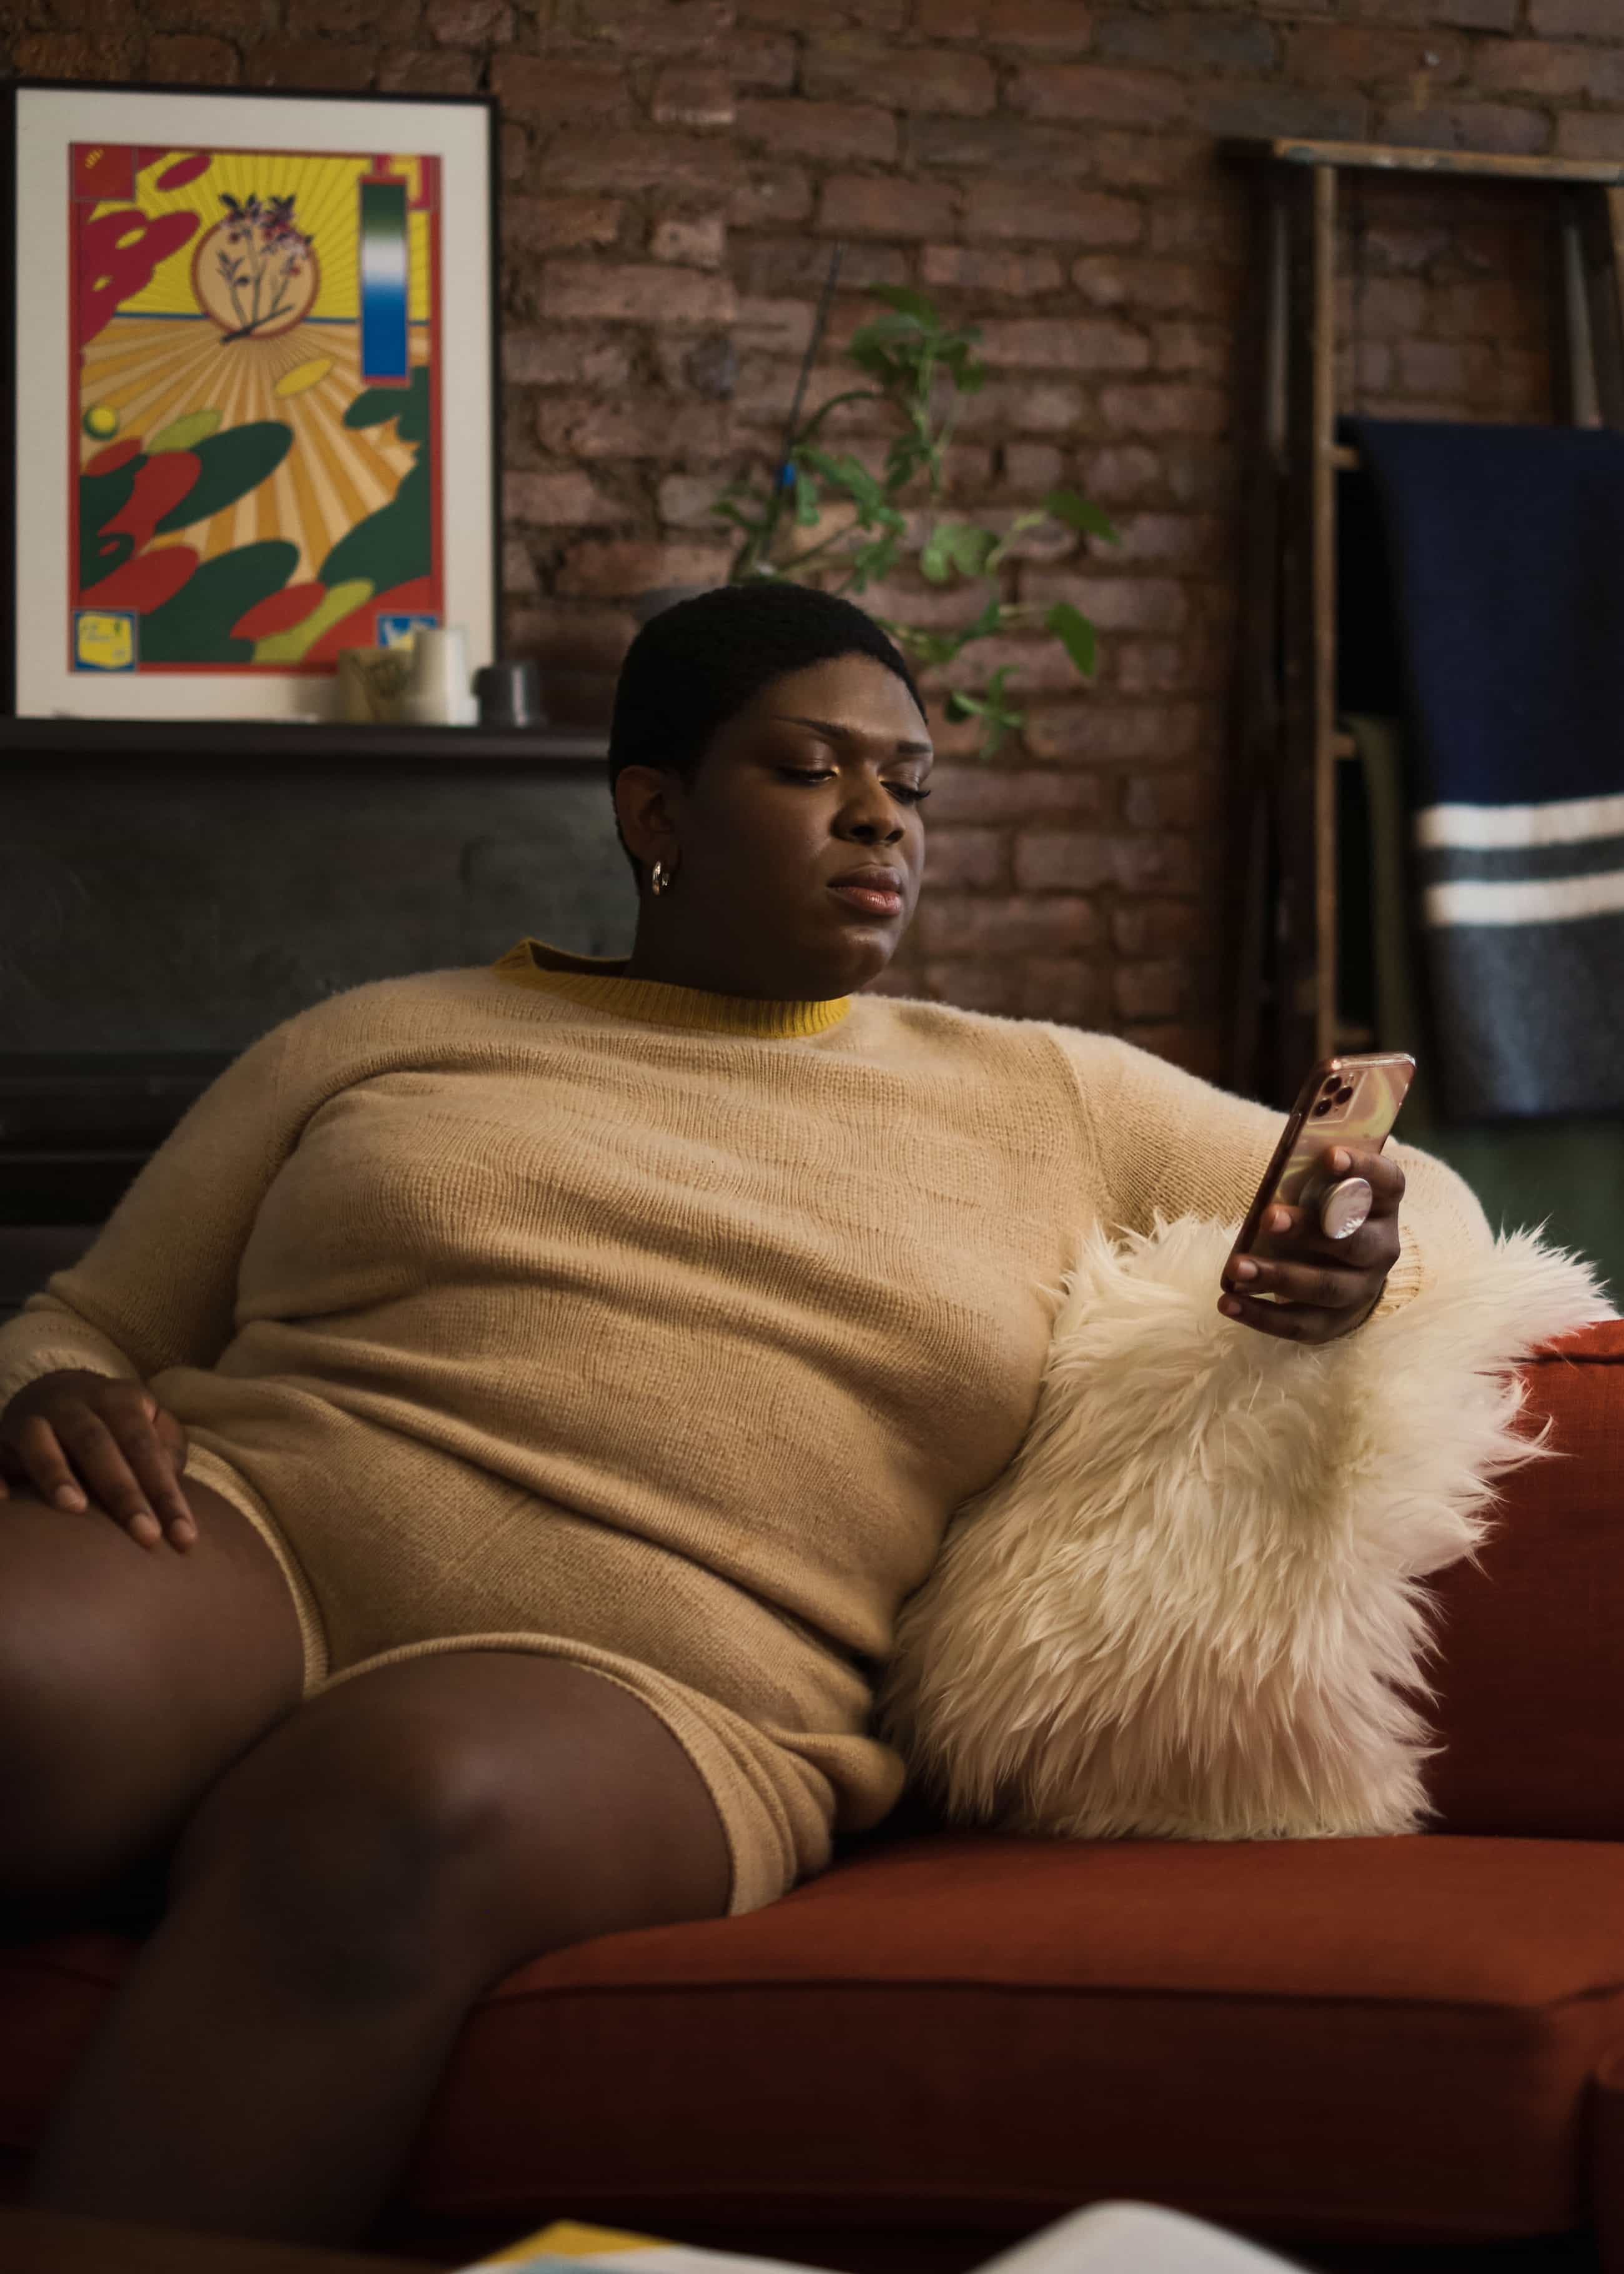 a non-binary Black woman looking down at a cell phone, source: https://genderspectrum.vice.com/